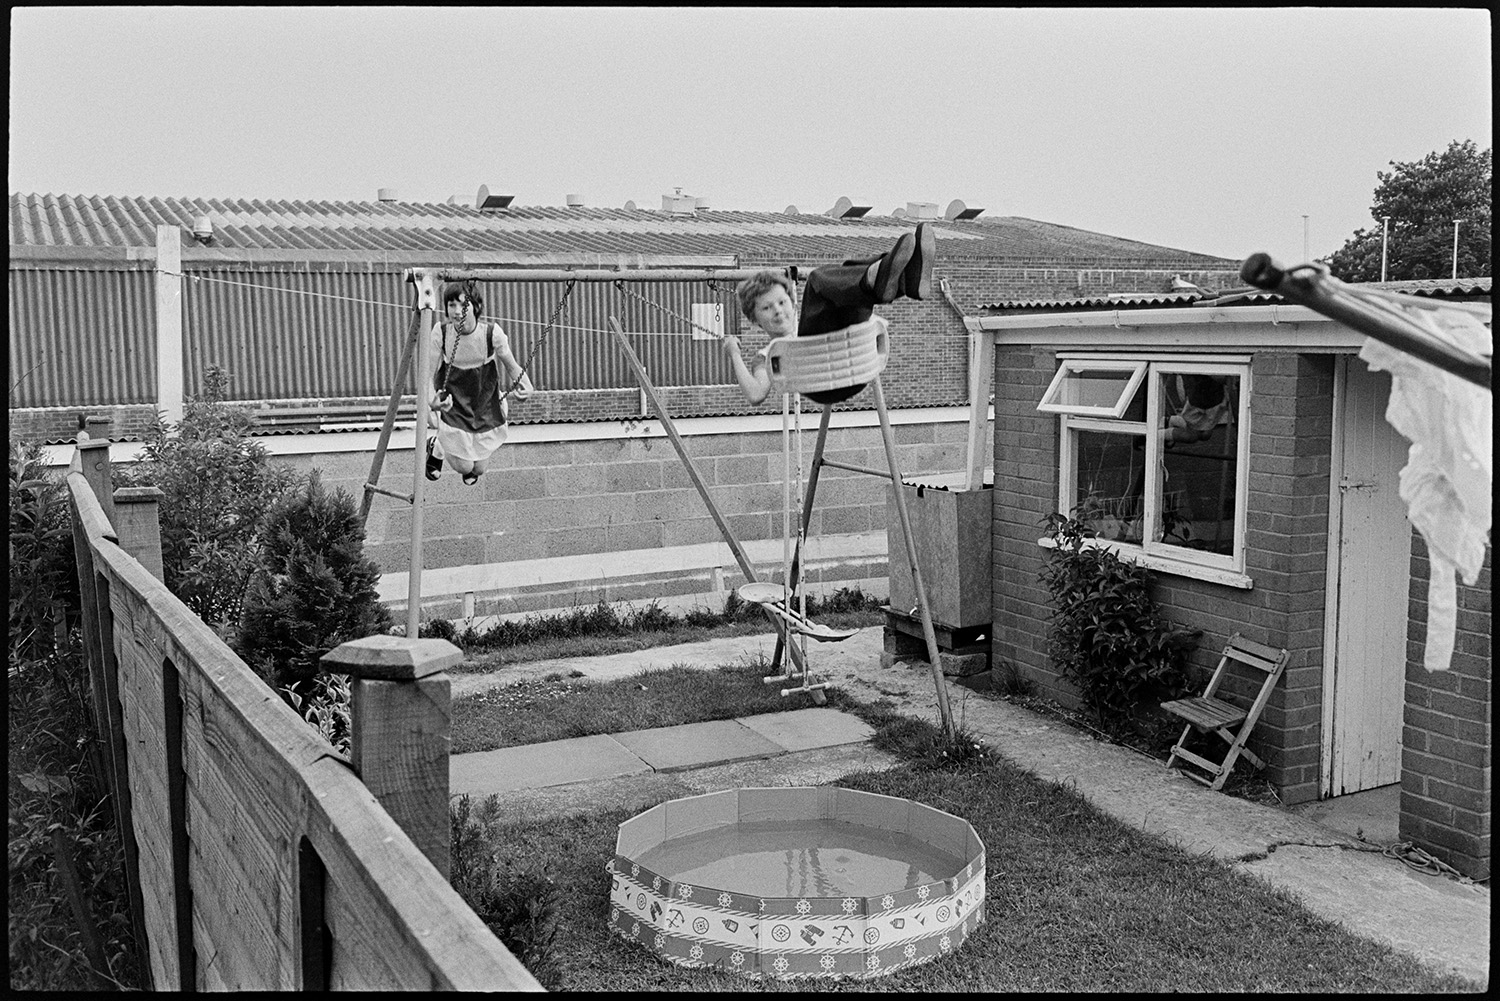 Children playing on swings. 
[Two children playing on swings in a garden in Dolton. A paddling pool is in front of the swings.]